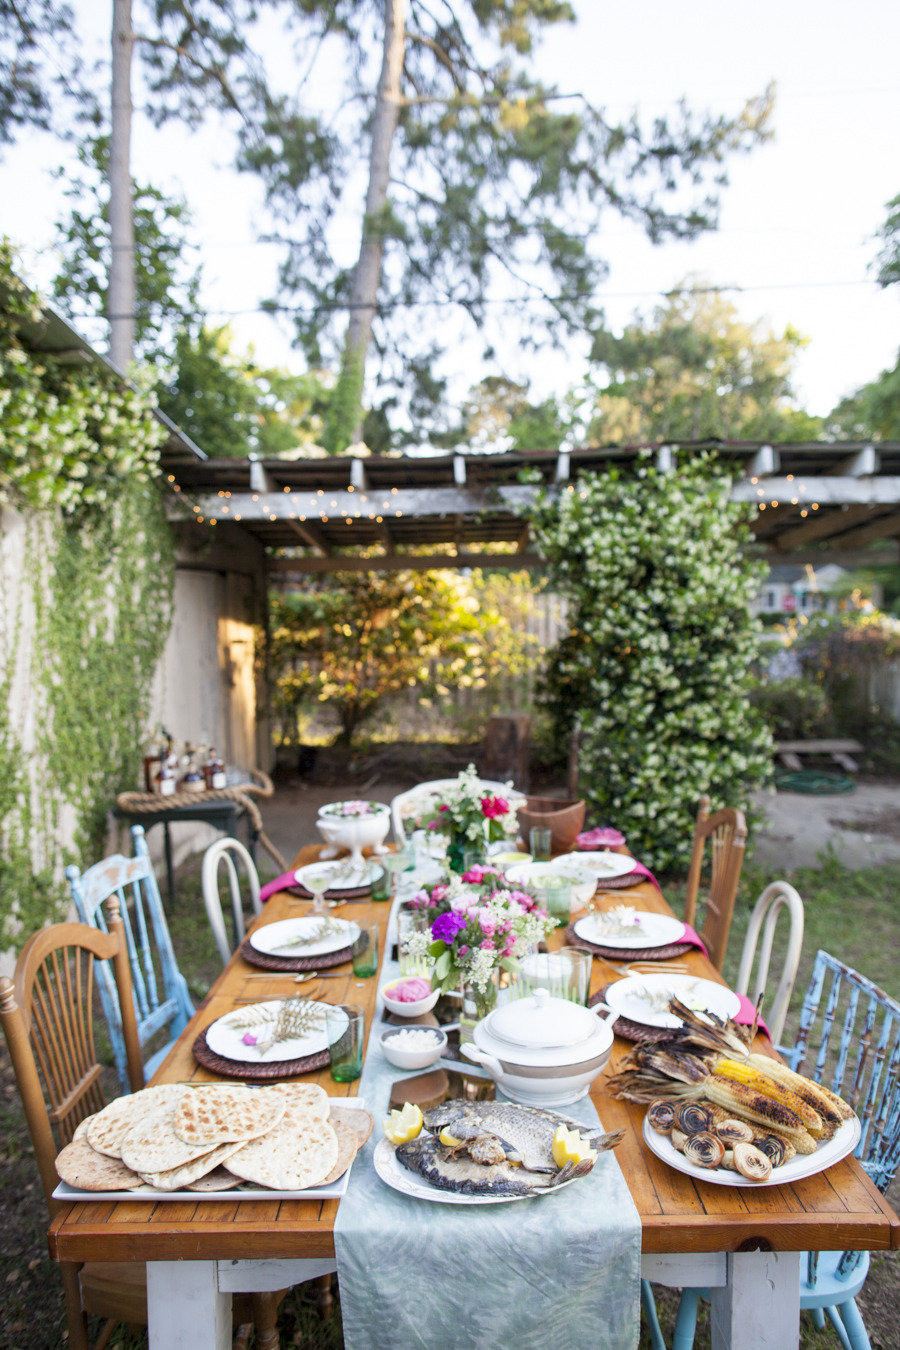 Backyard Party Supplies
 50 Outdoor Party Ideas You Should Try Out This Summer